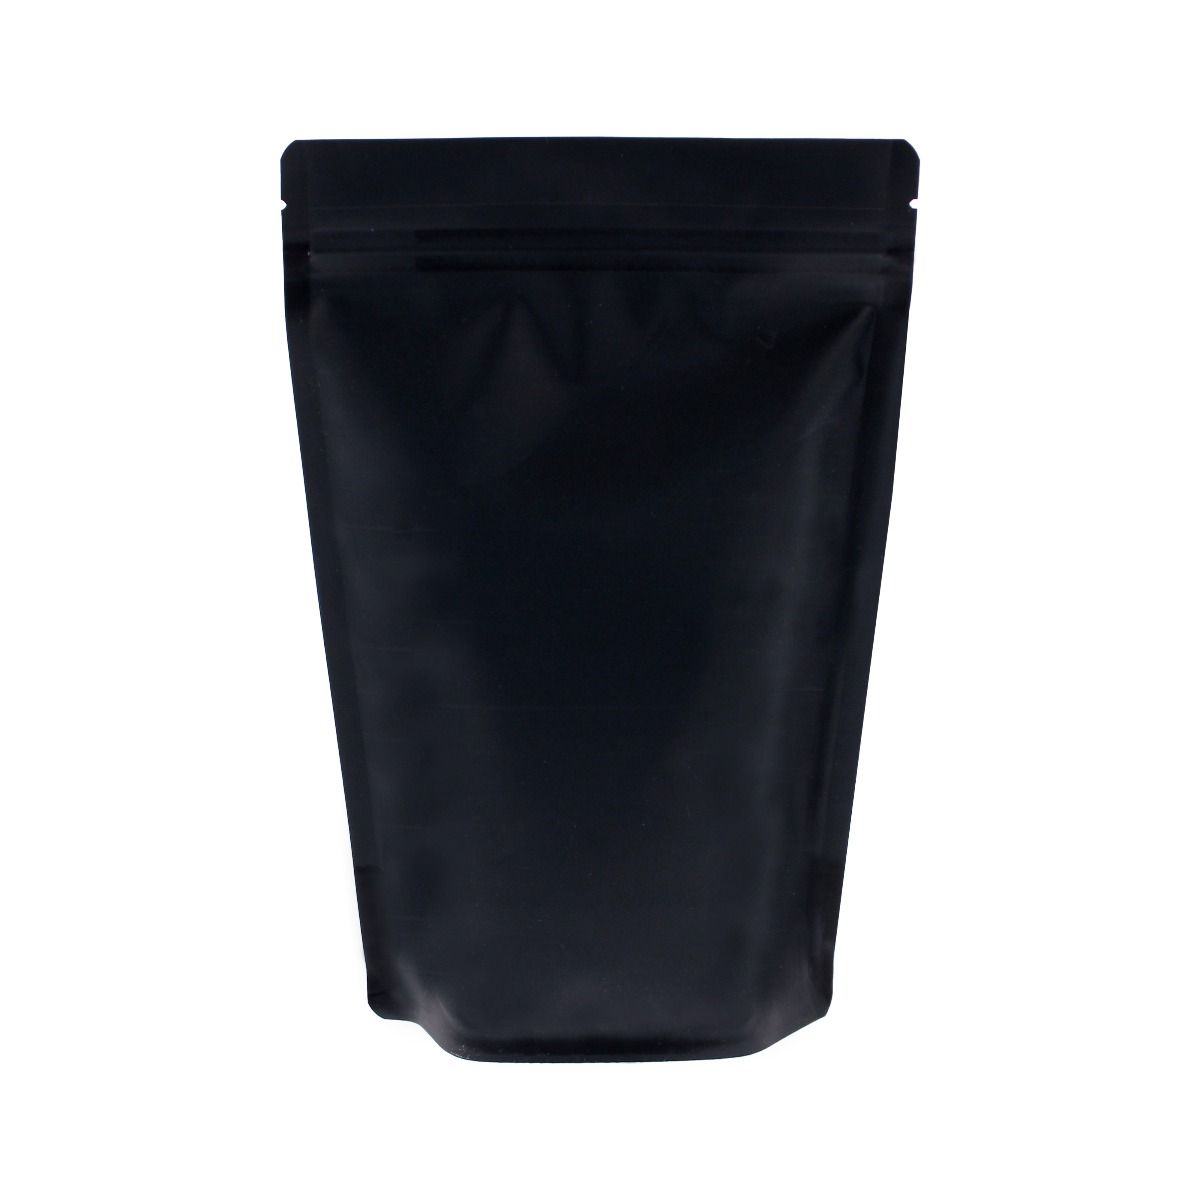 Stand-up pouch - matt black (100% recyclable)